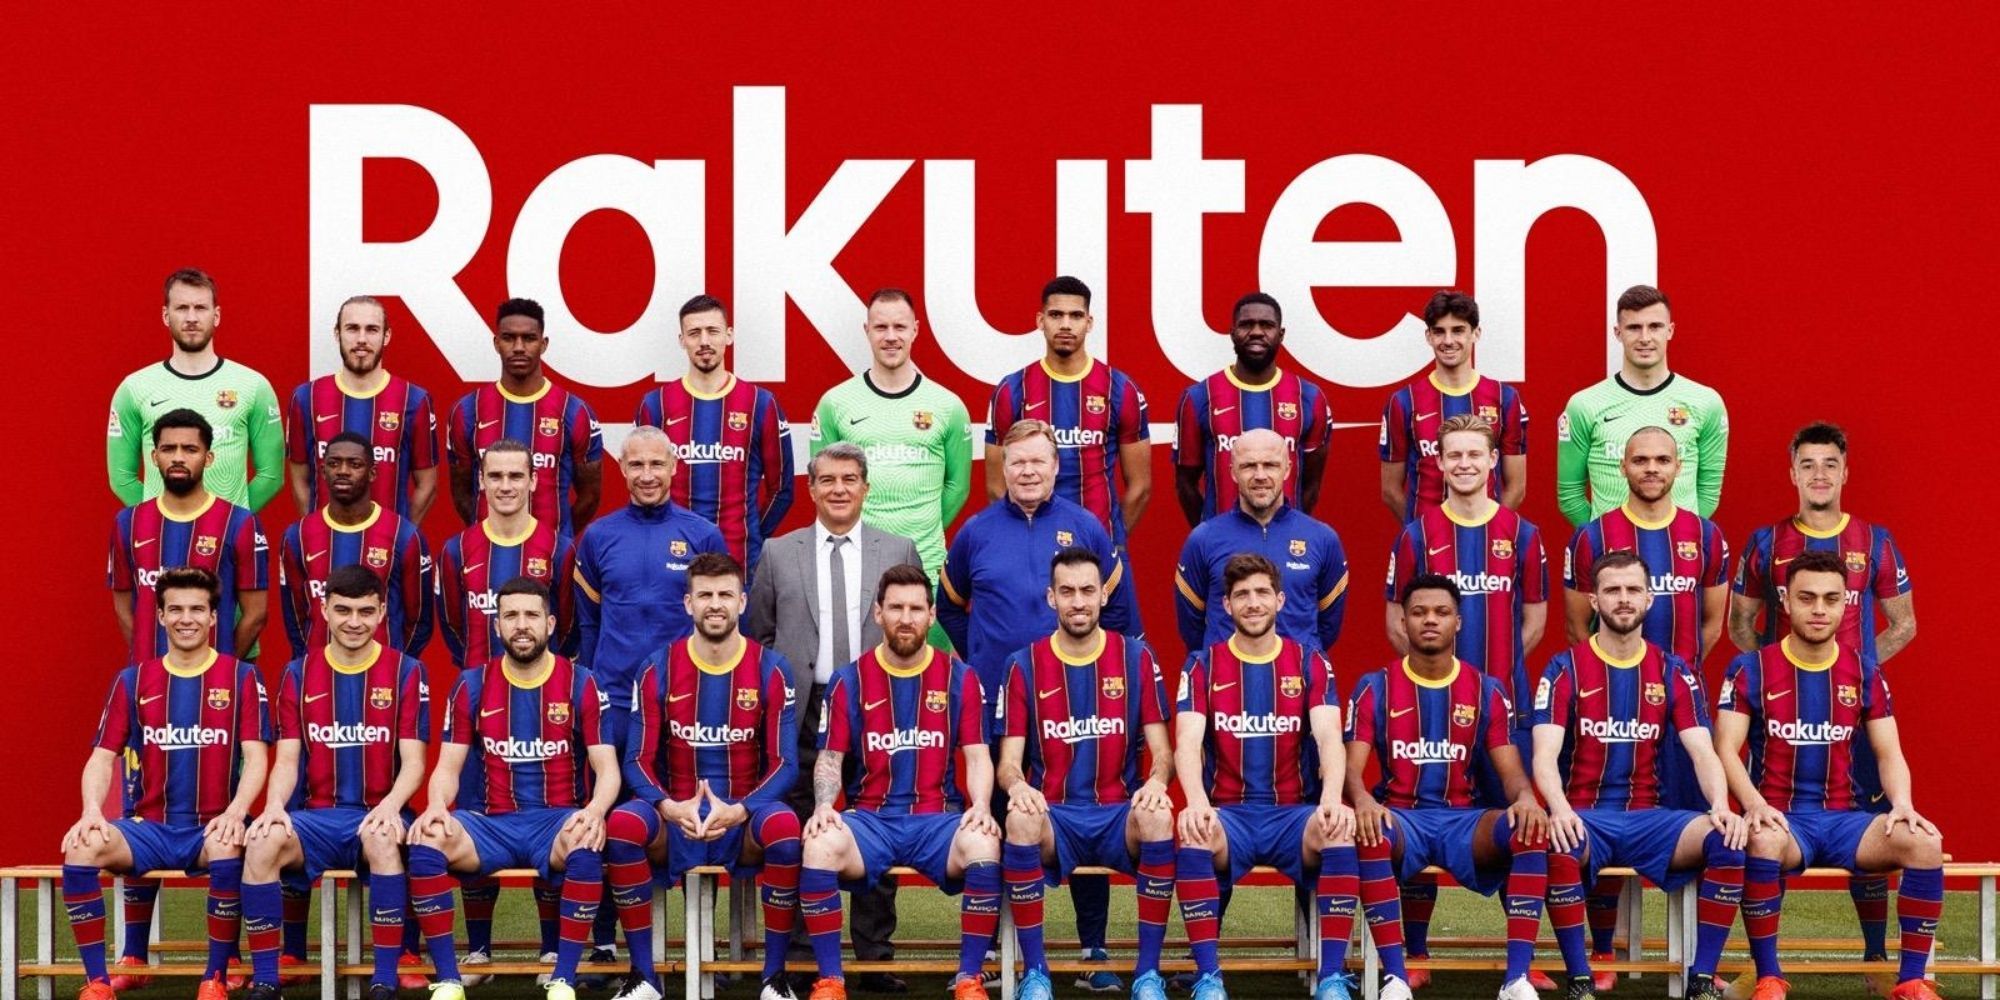 Official image of FC Barcelona football team.